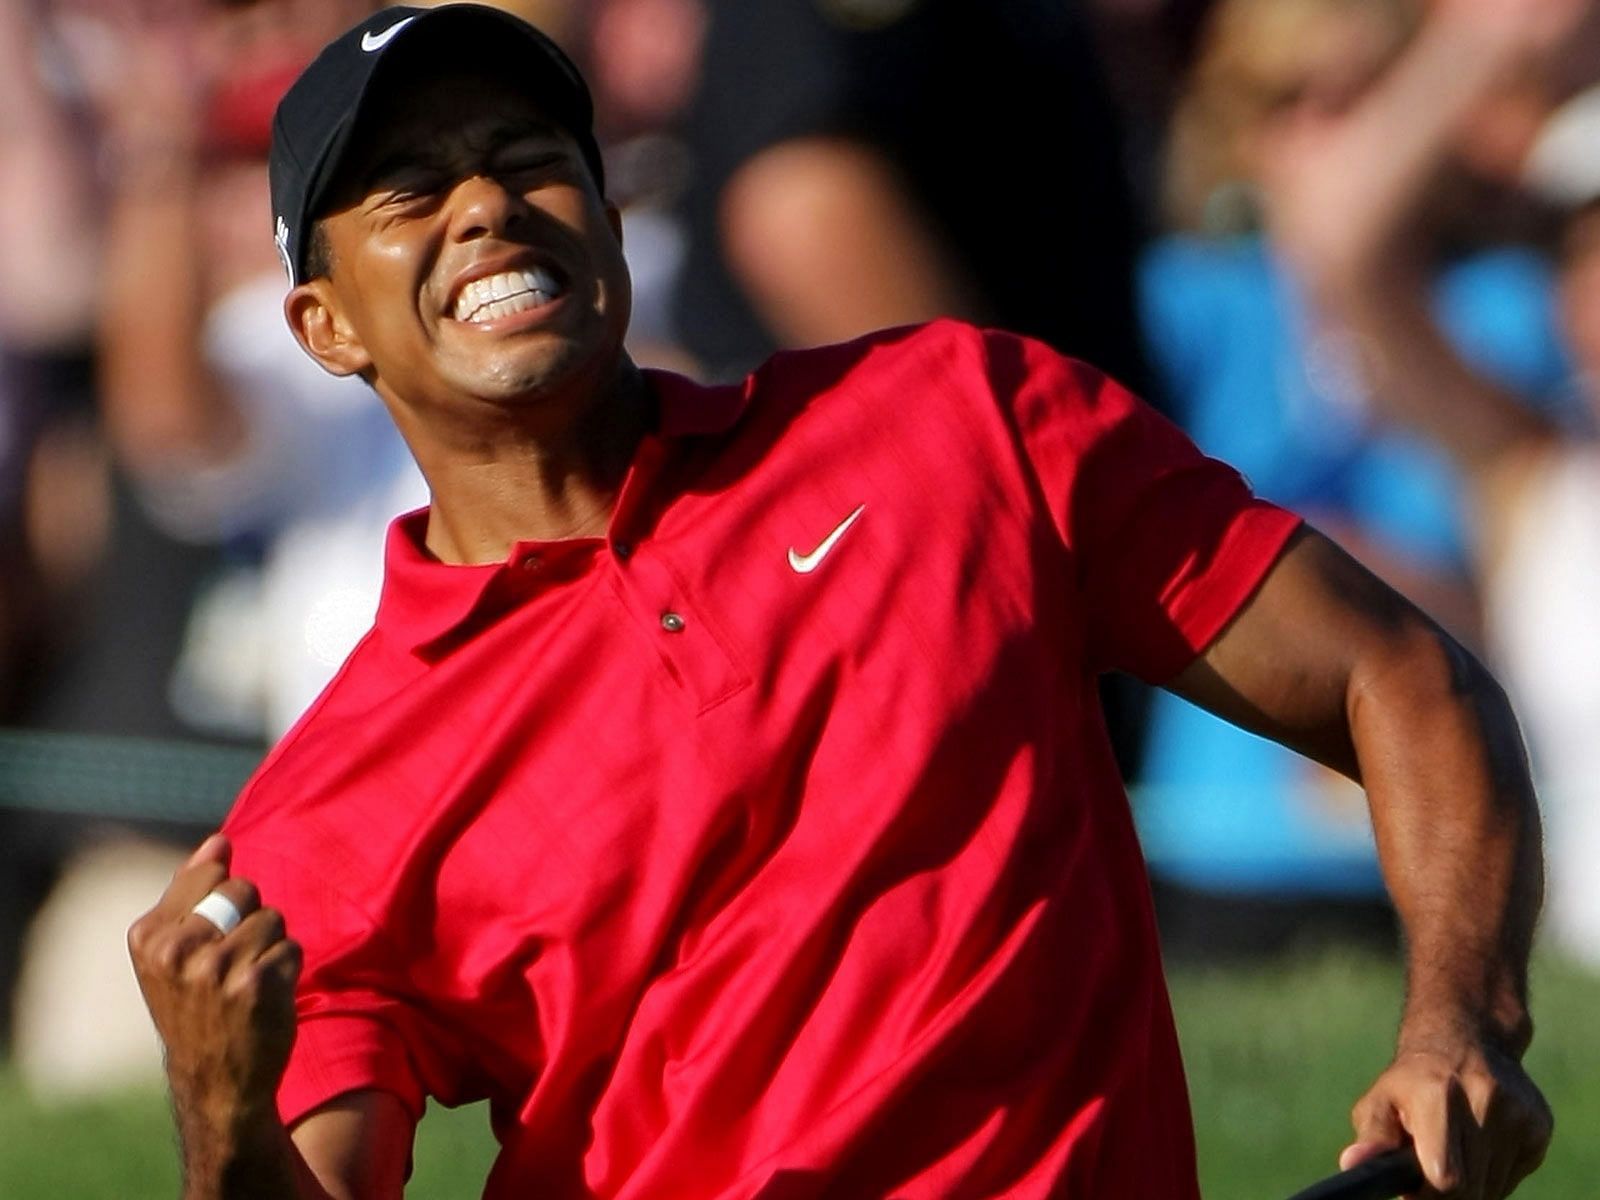 Woods has had a long association with Nike (Image via Getty)